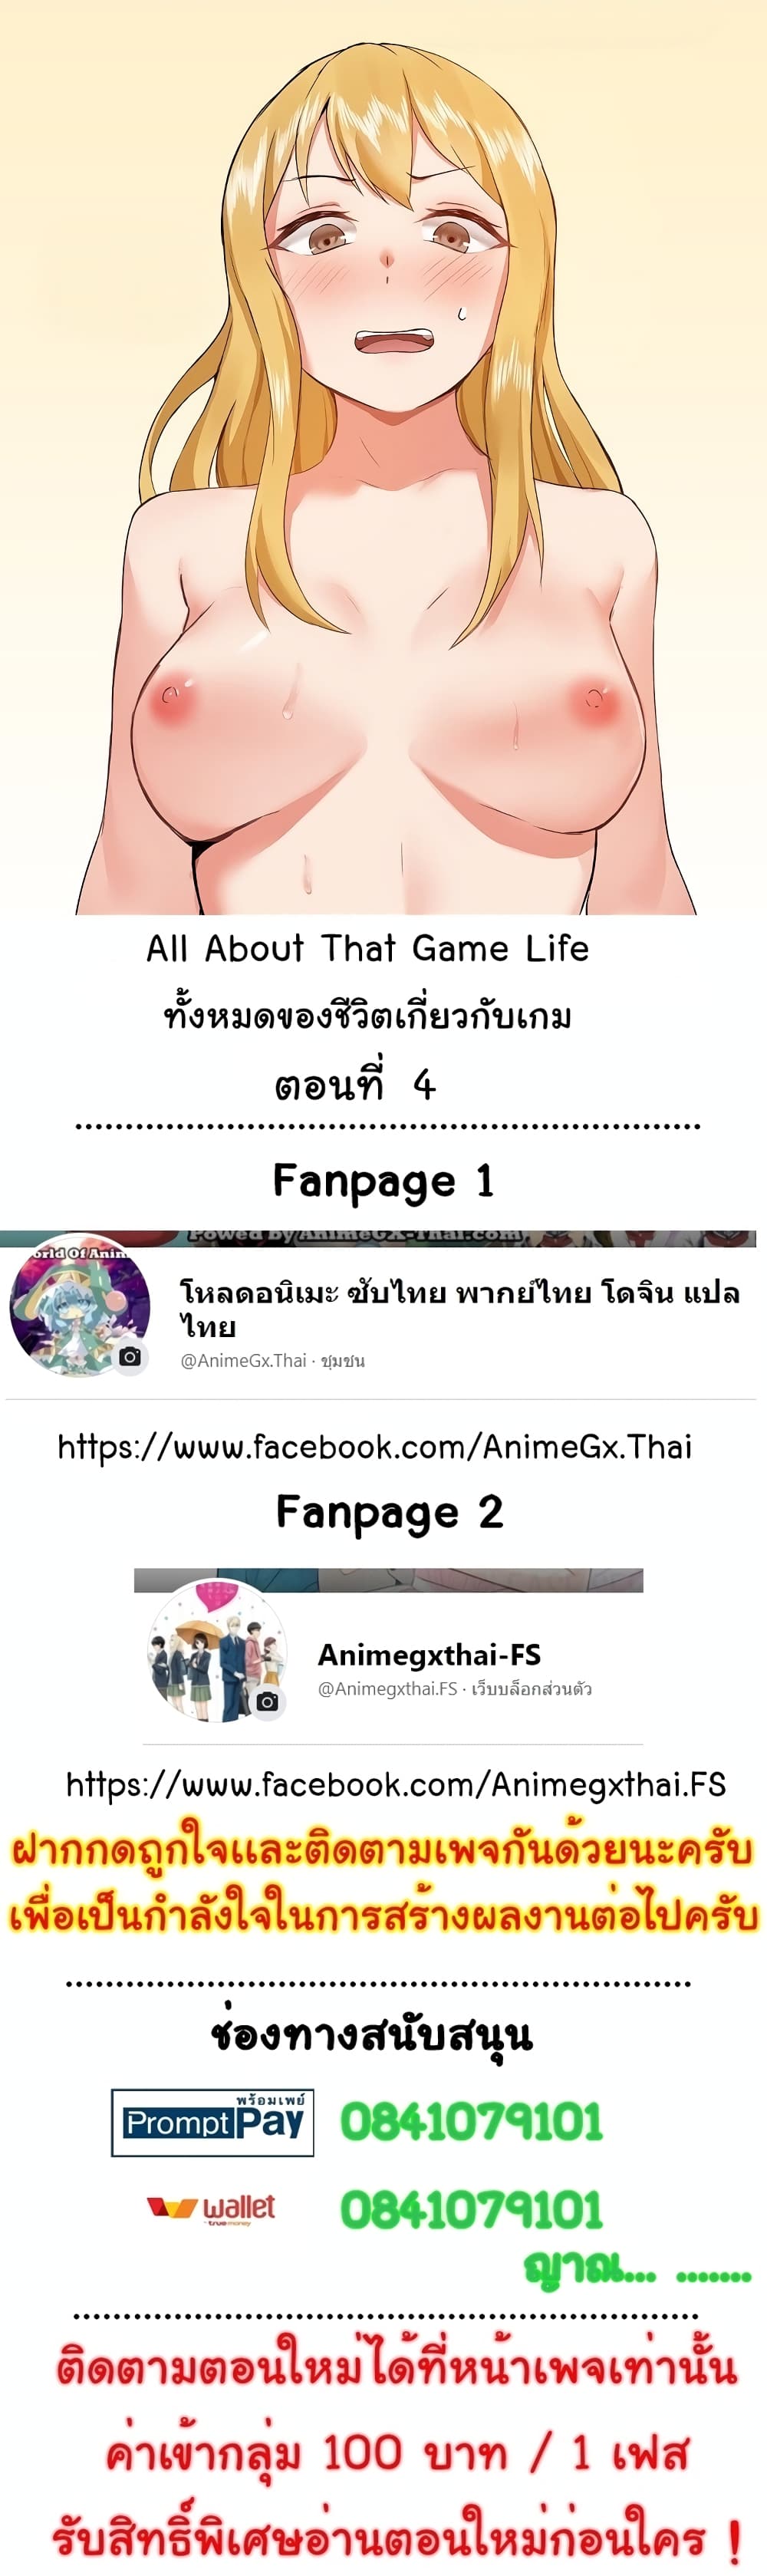 All About That Game Life4 (1)